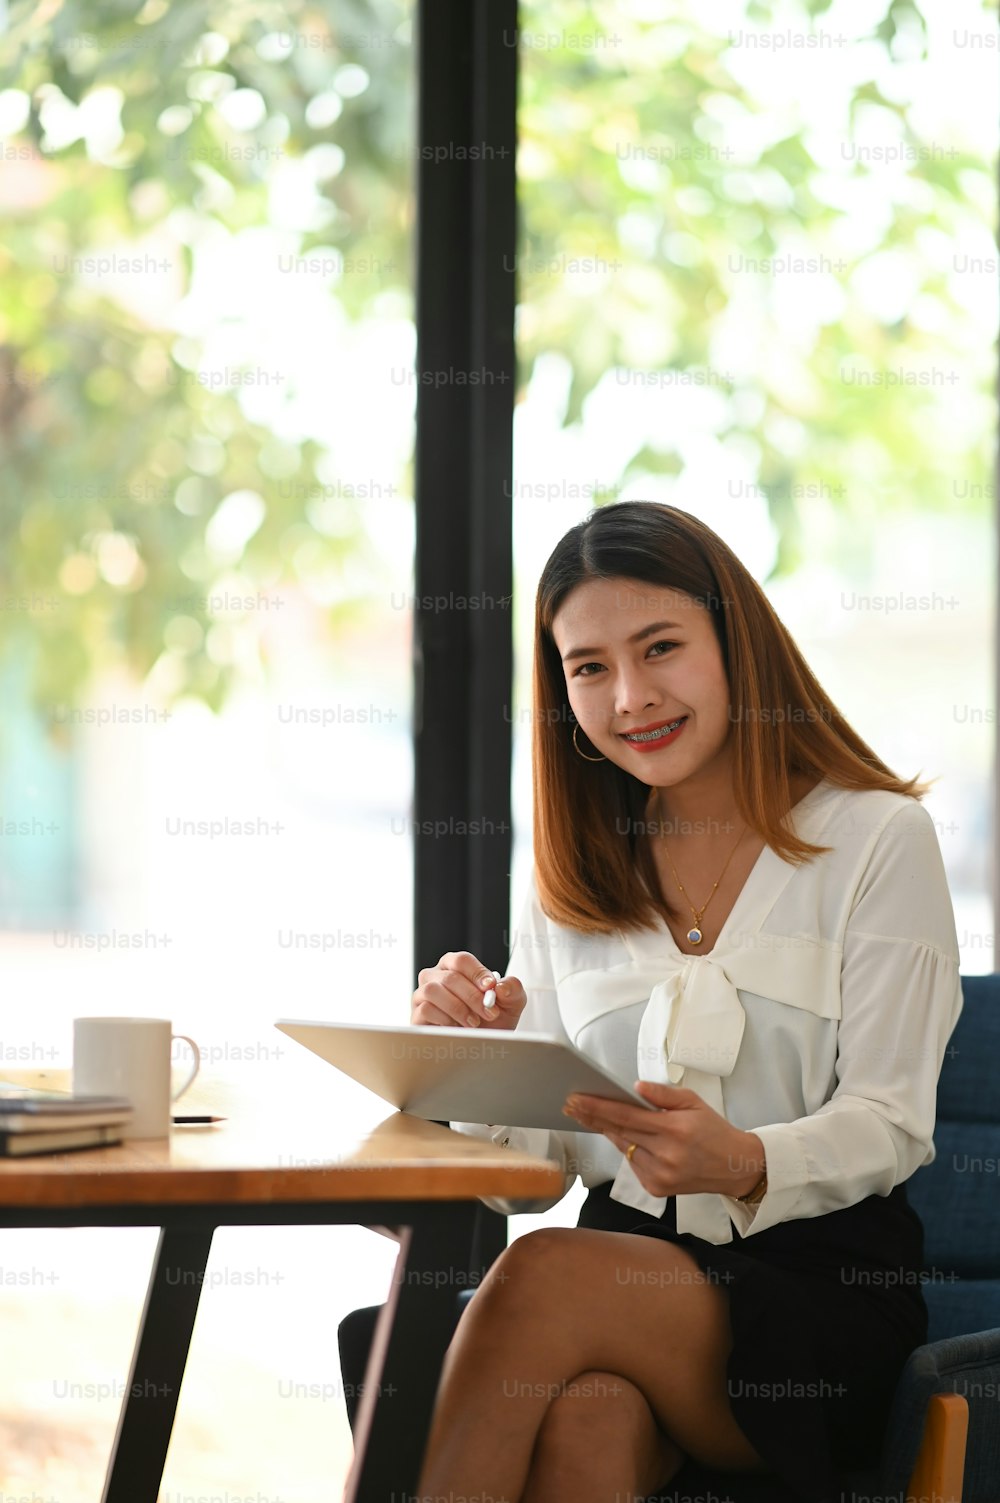 Portrait of young beautiful woman working as secretary using a computer tablet with stylus pen while sitting at the wooden working table with orderly office wall glass as background.